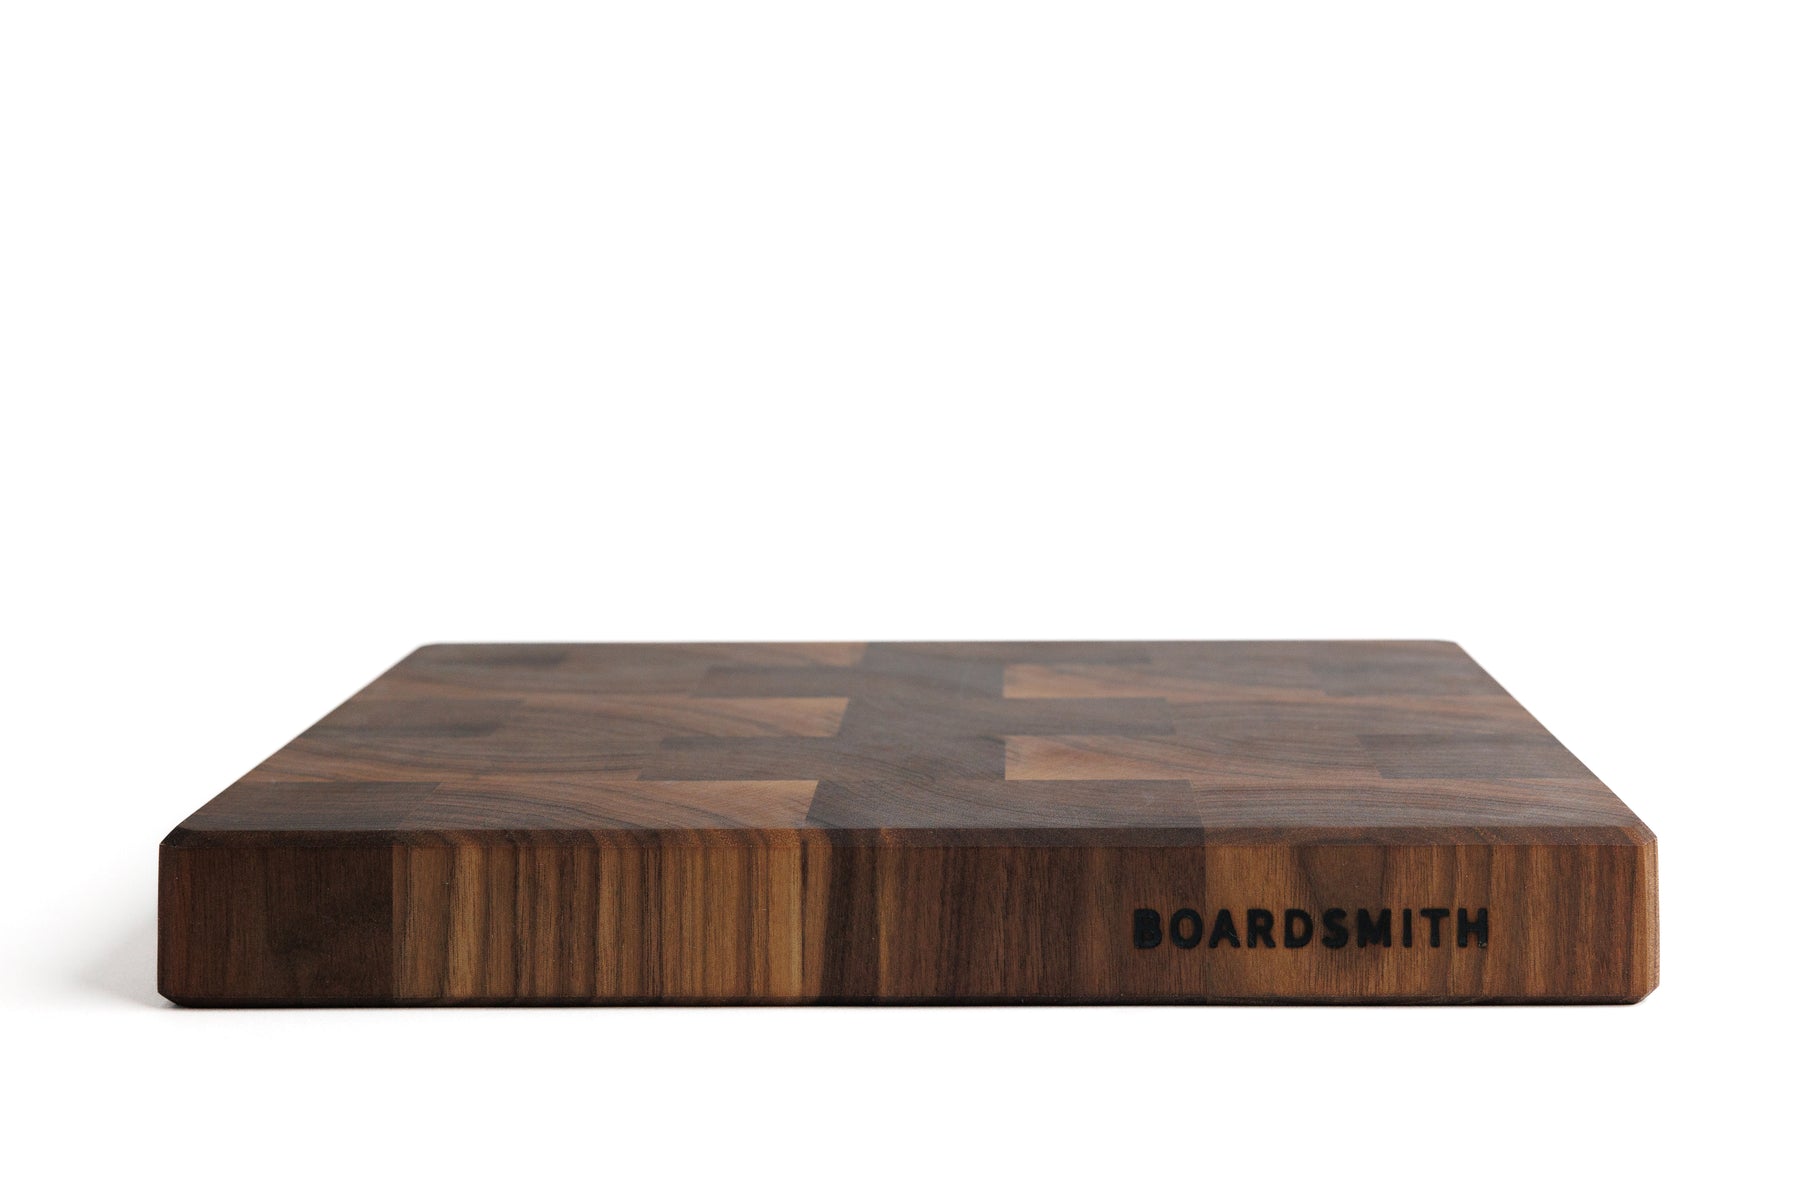 Large End Grain Walnut Chopping Board With Central Finger Grooves Full 50mm  Thick 